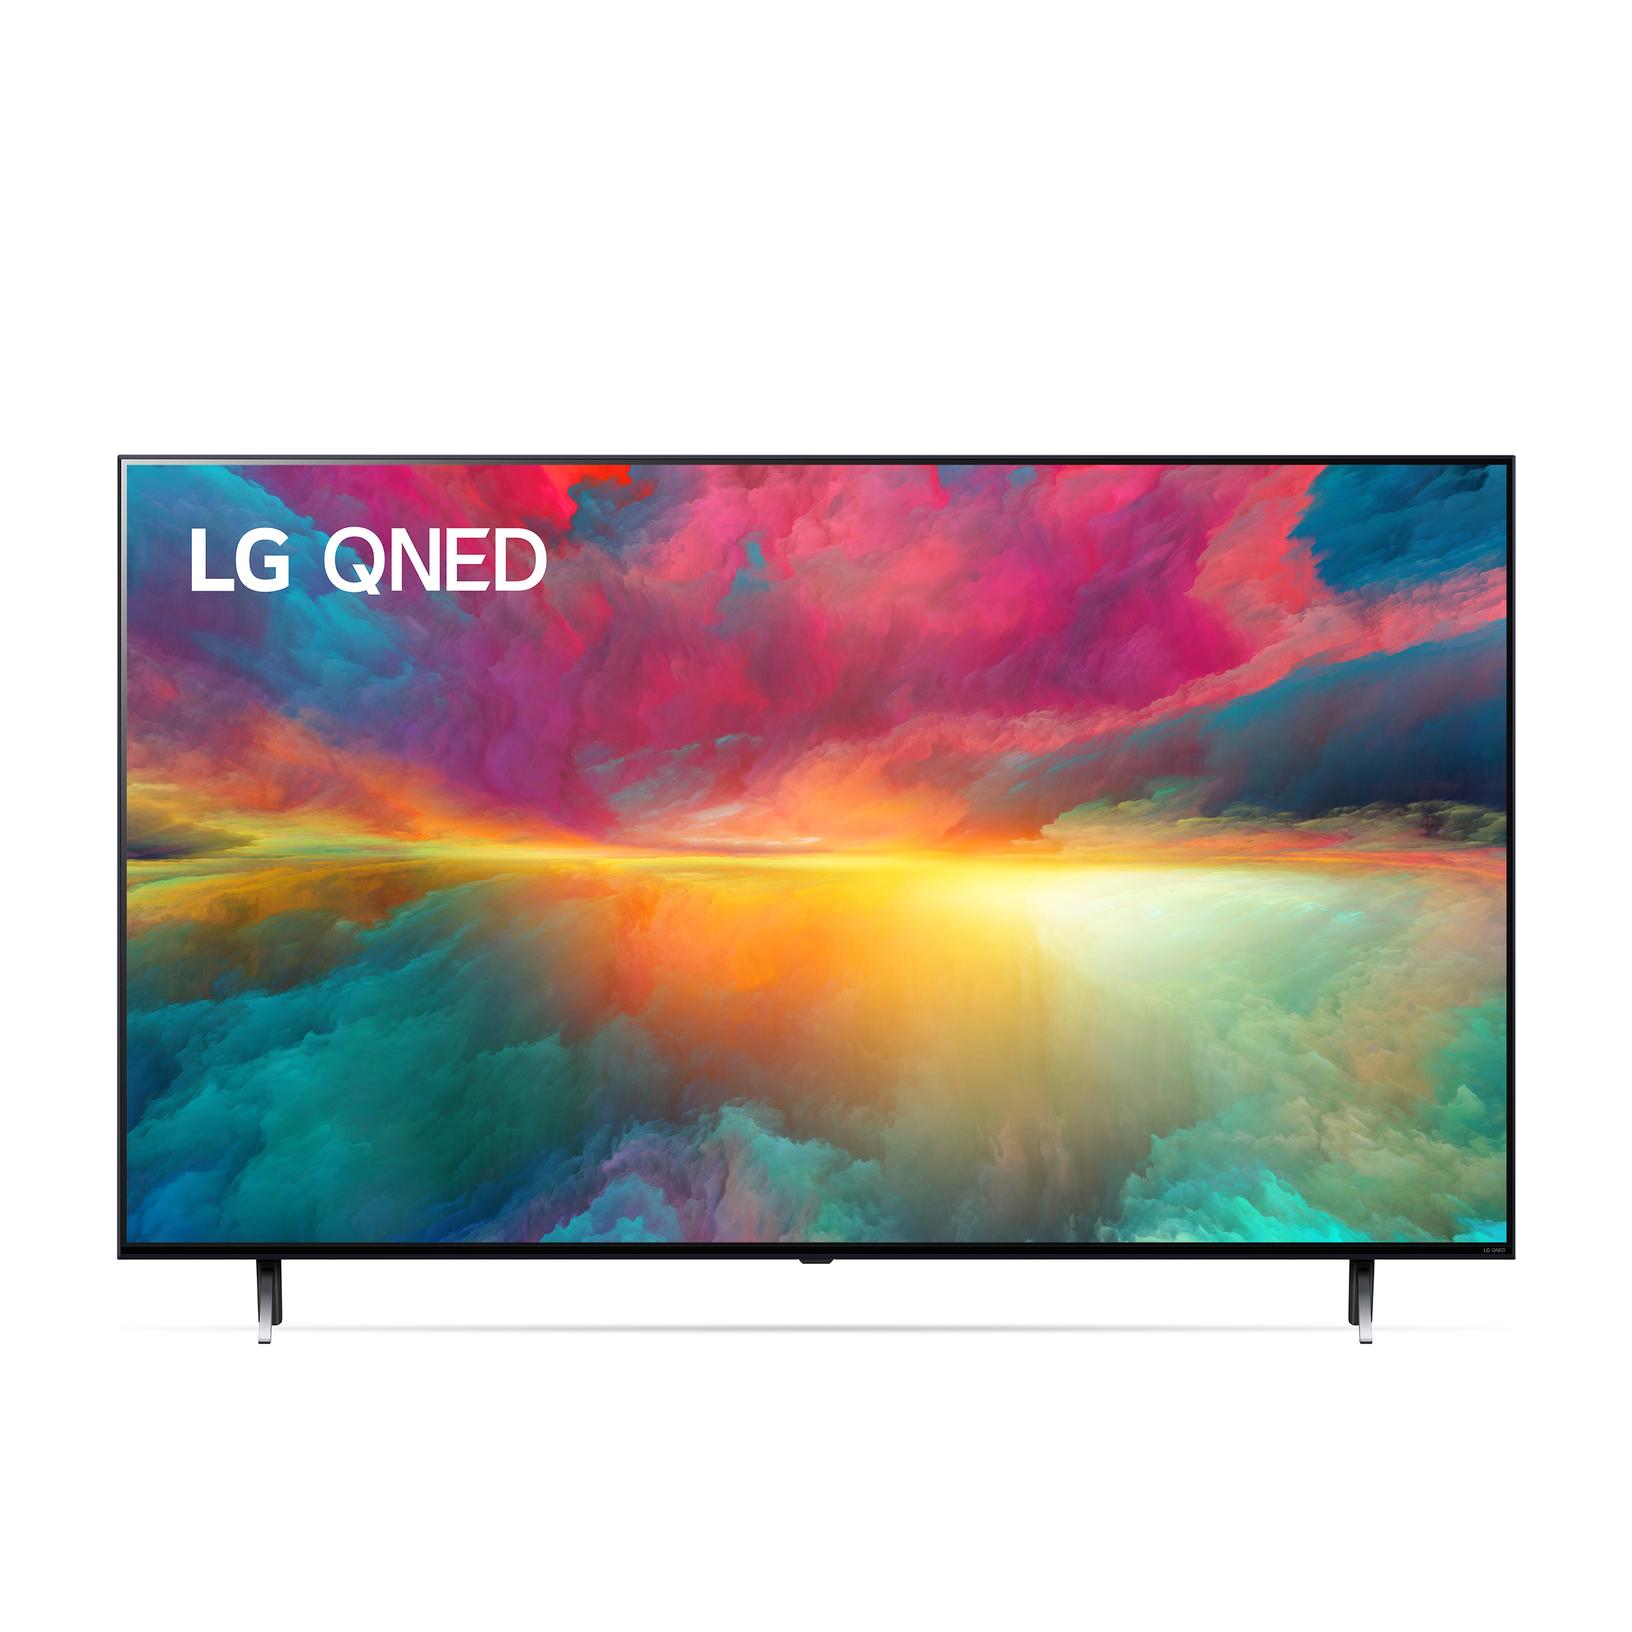 Offerta per LG - QNED 55'' Serie QNED75 55QNED756RA, TV 4K, 4 HDMI, SMART TV 2023 a 649€ in Comet